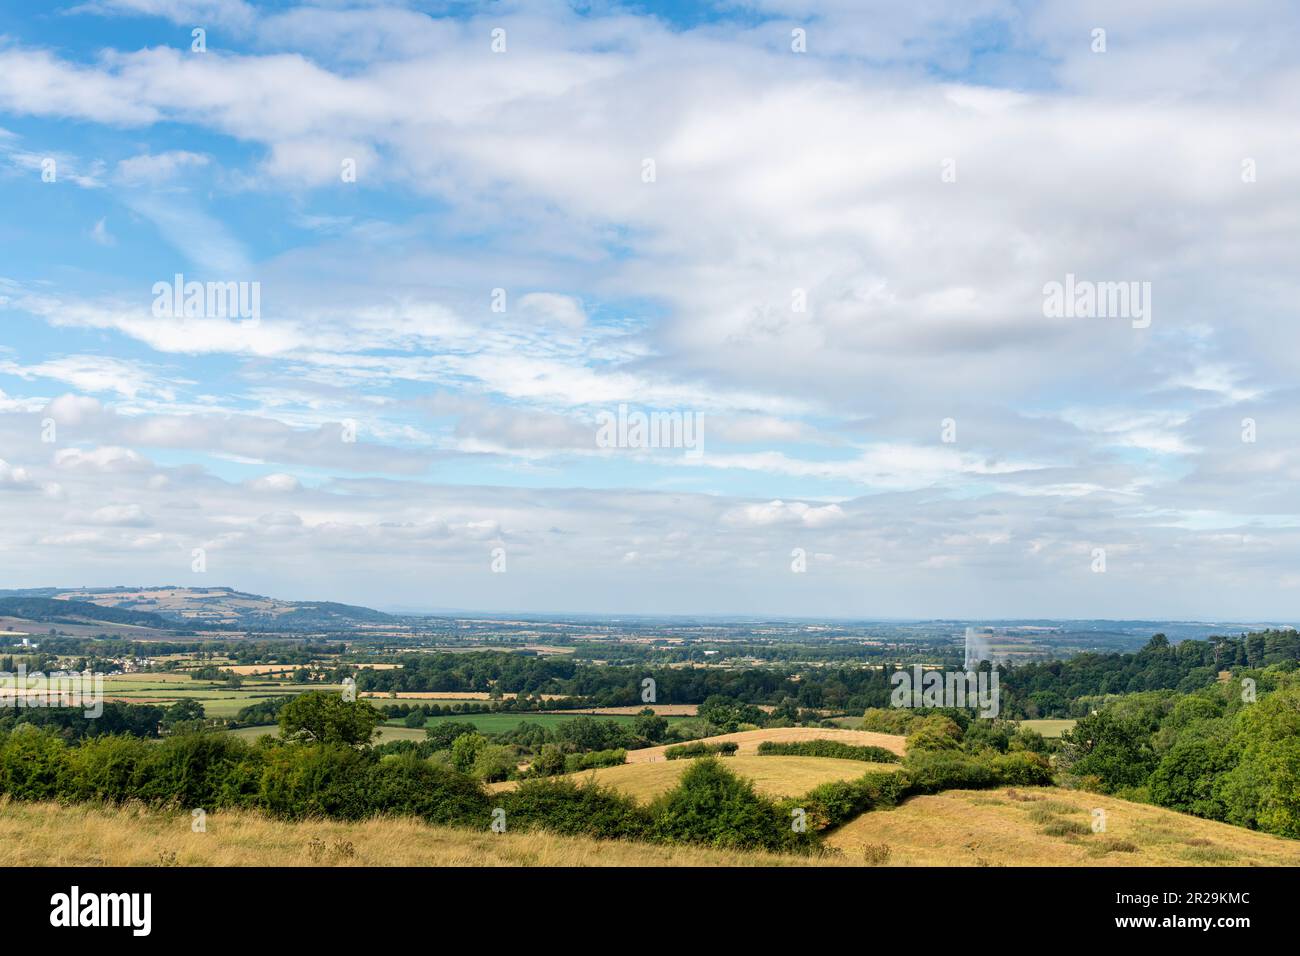 Panoramic view from a hill over the Cotswolds landscape near Stanway, Cheltenham, UK, with visible worlds highest gravity fountain against white cloud Stock Photo